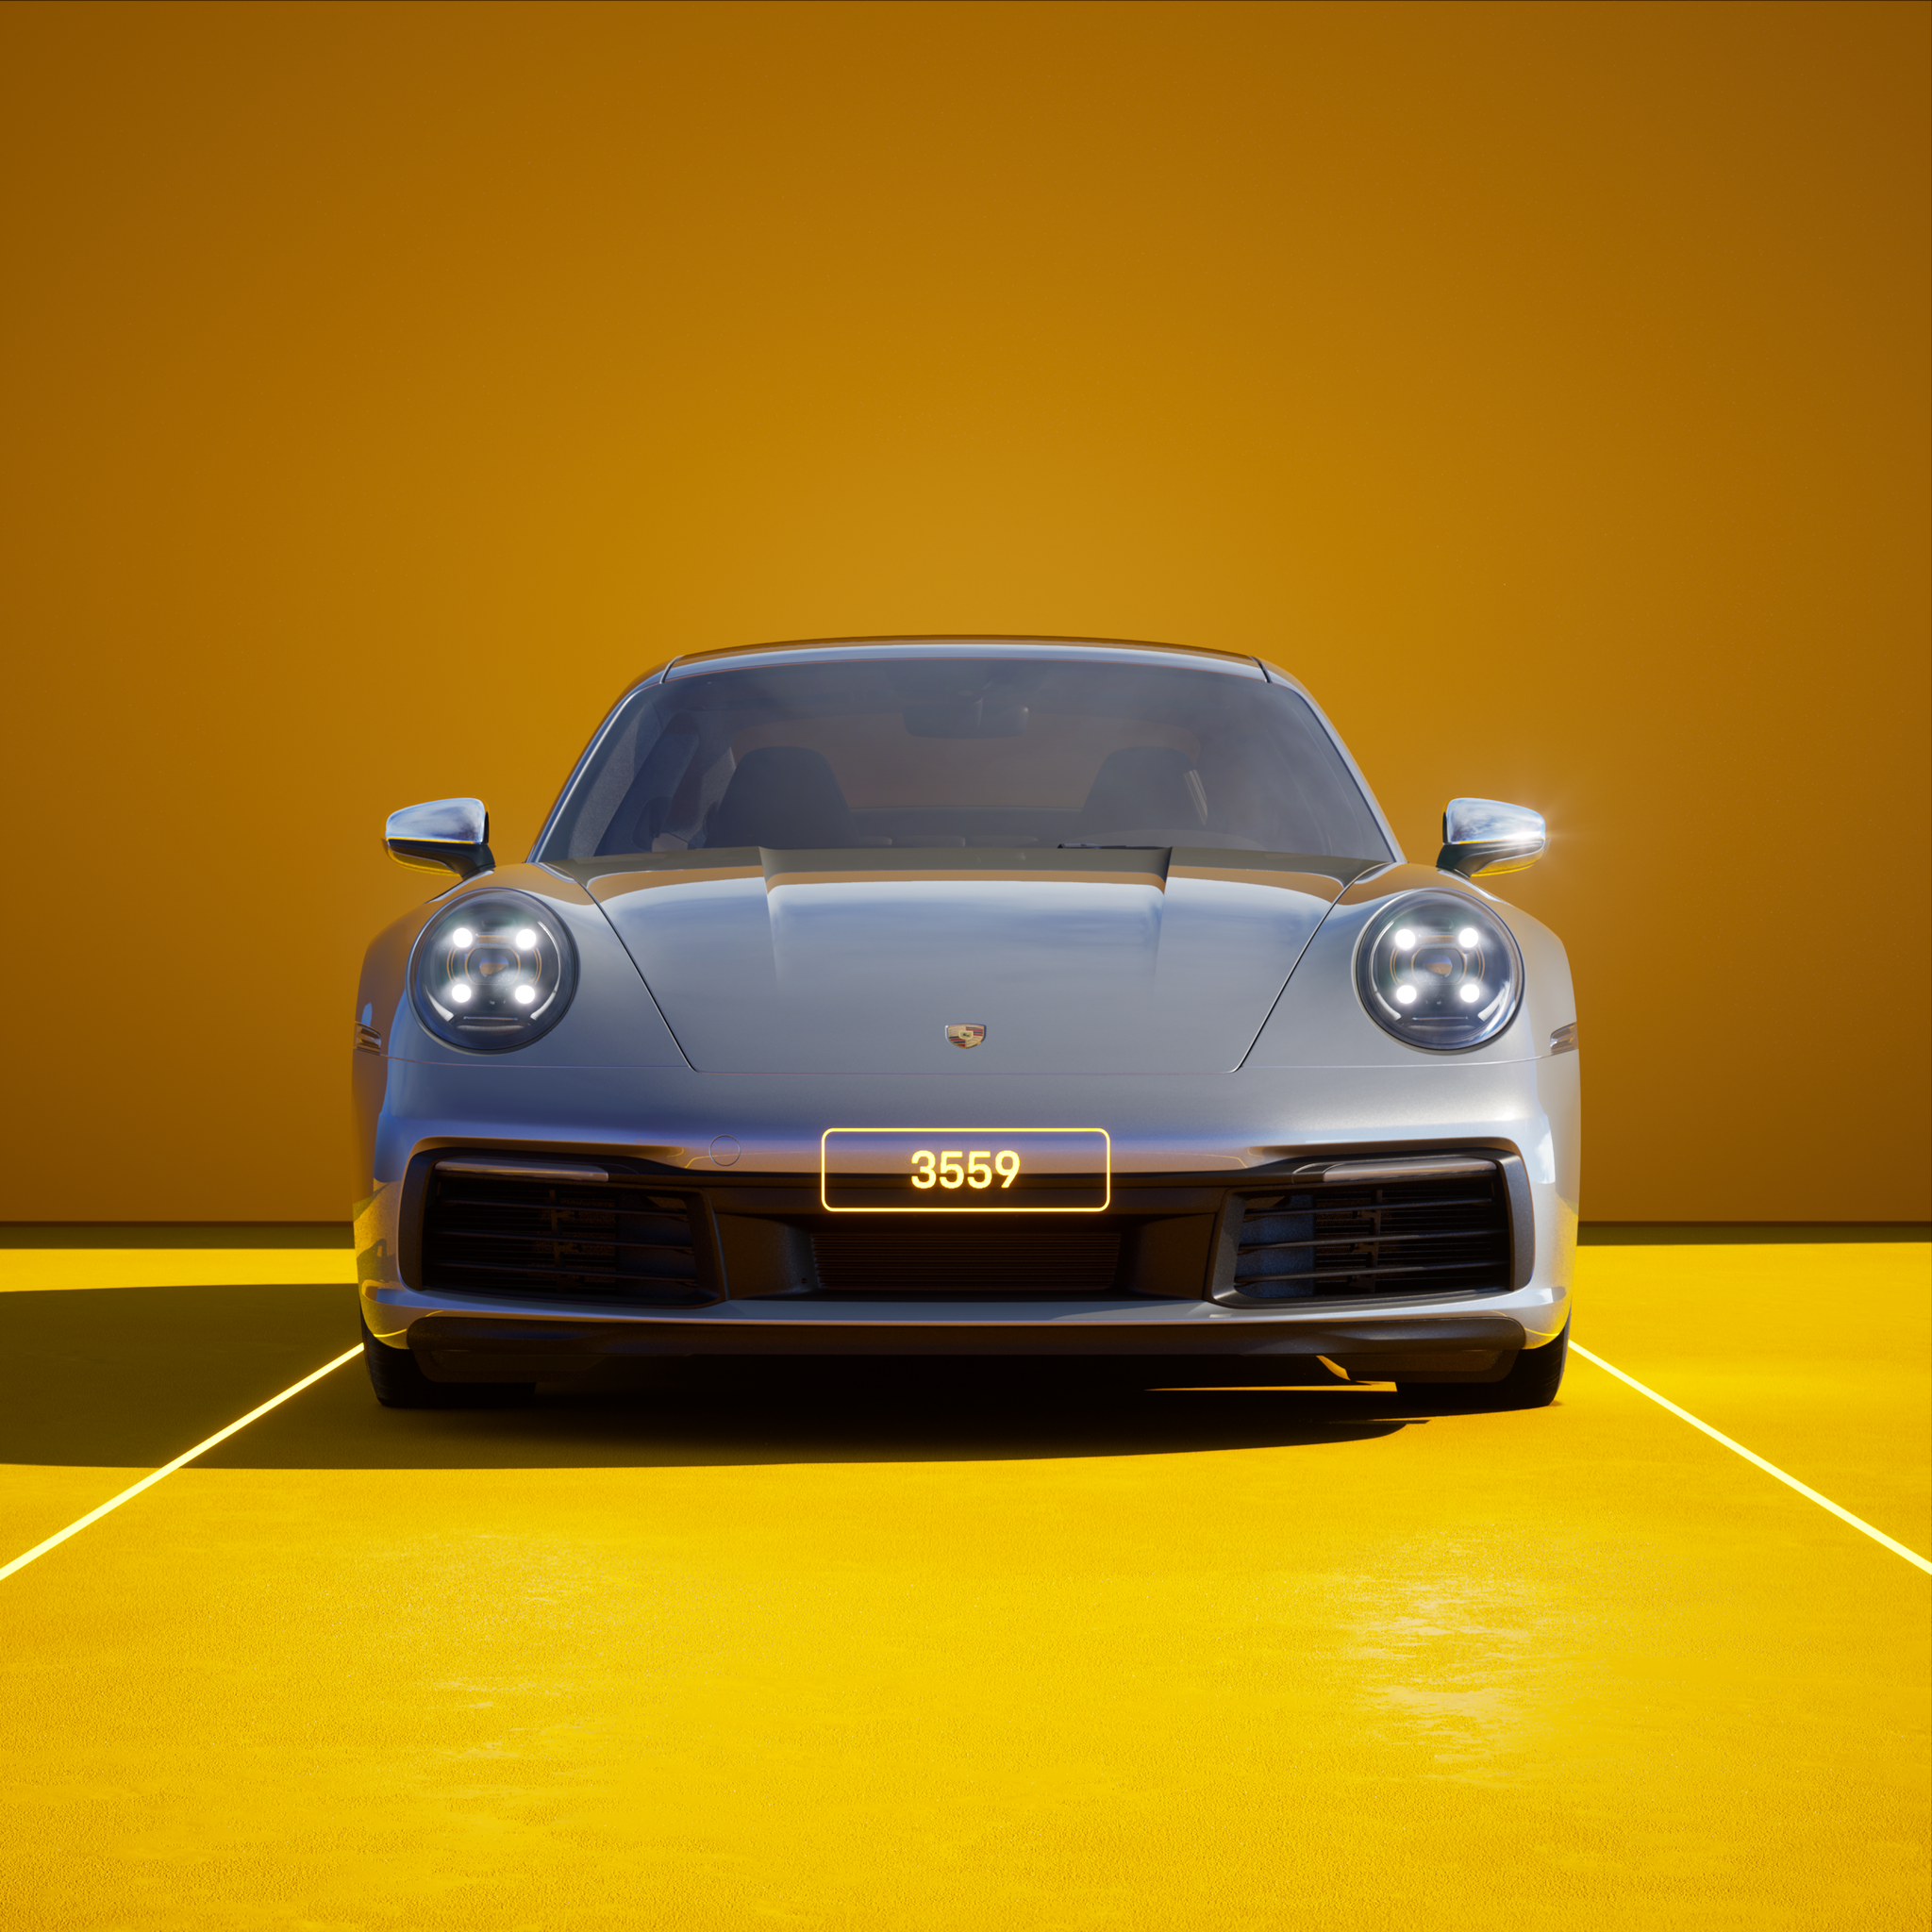 The PORSCHΞ 911 3559 image in phase